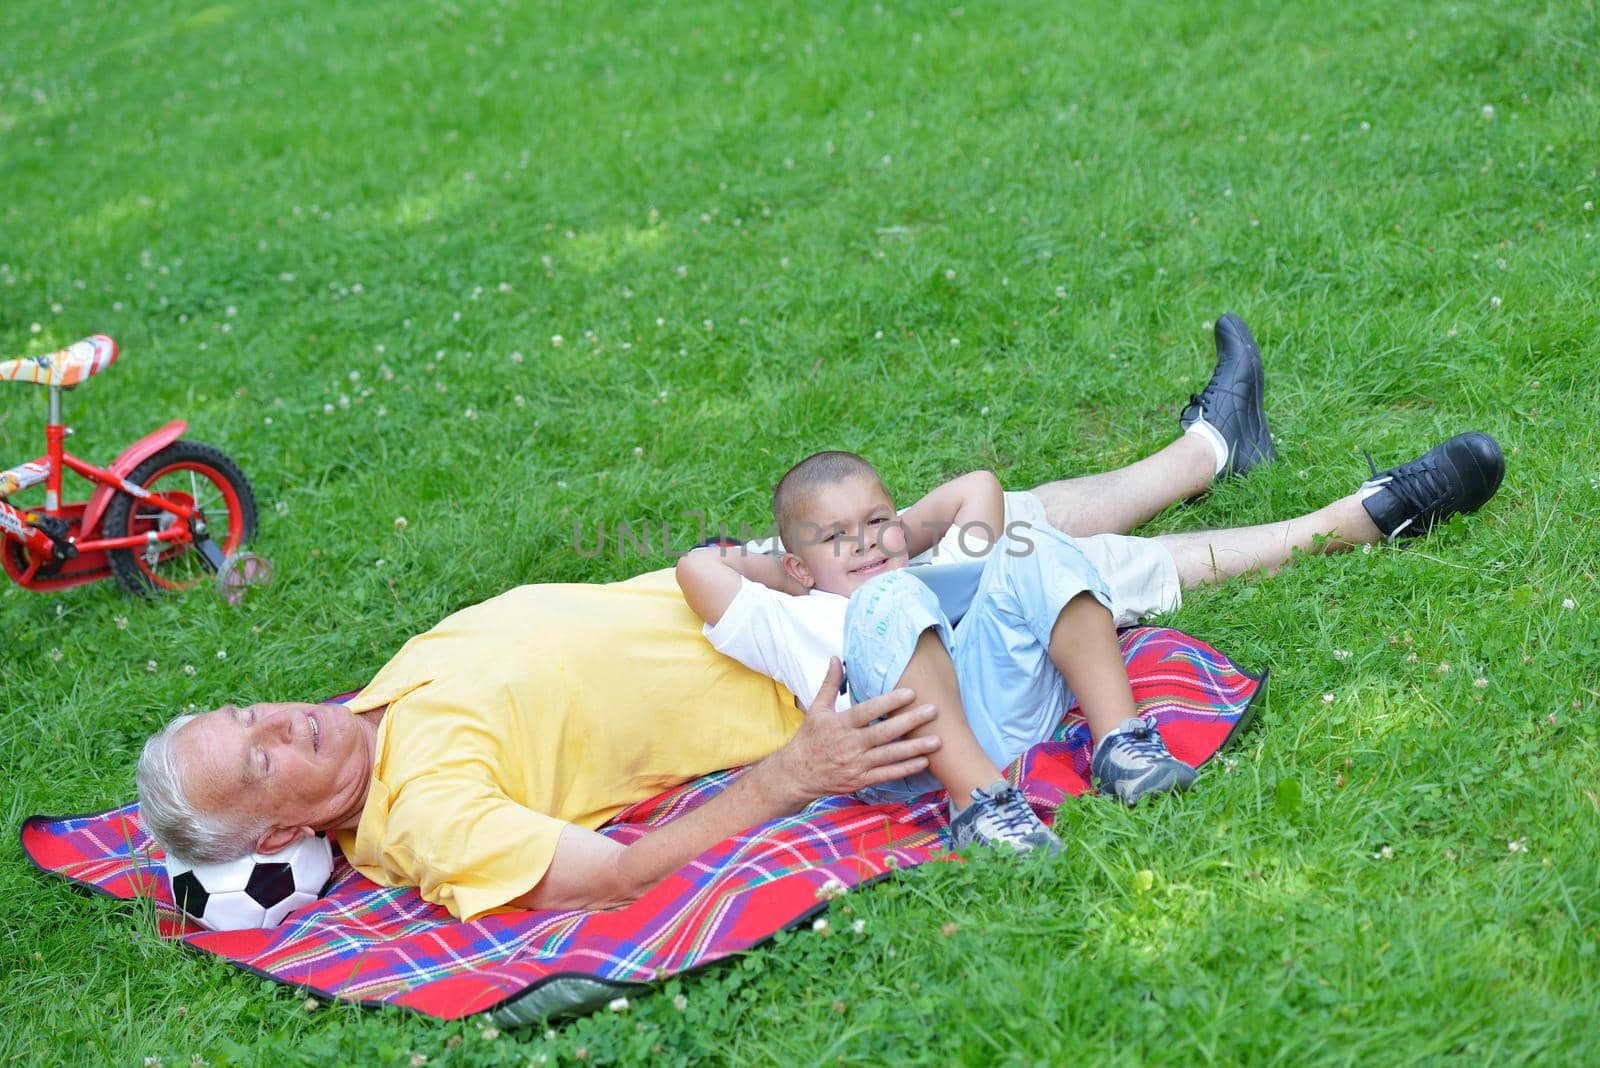 grandfather and child in park using tablet computer